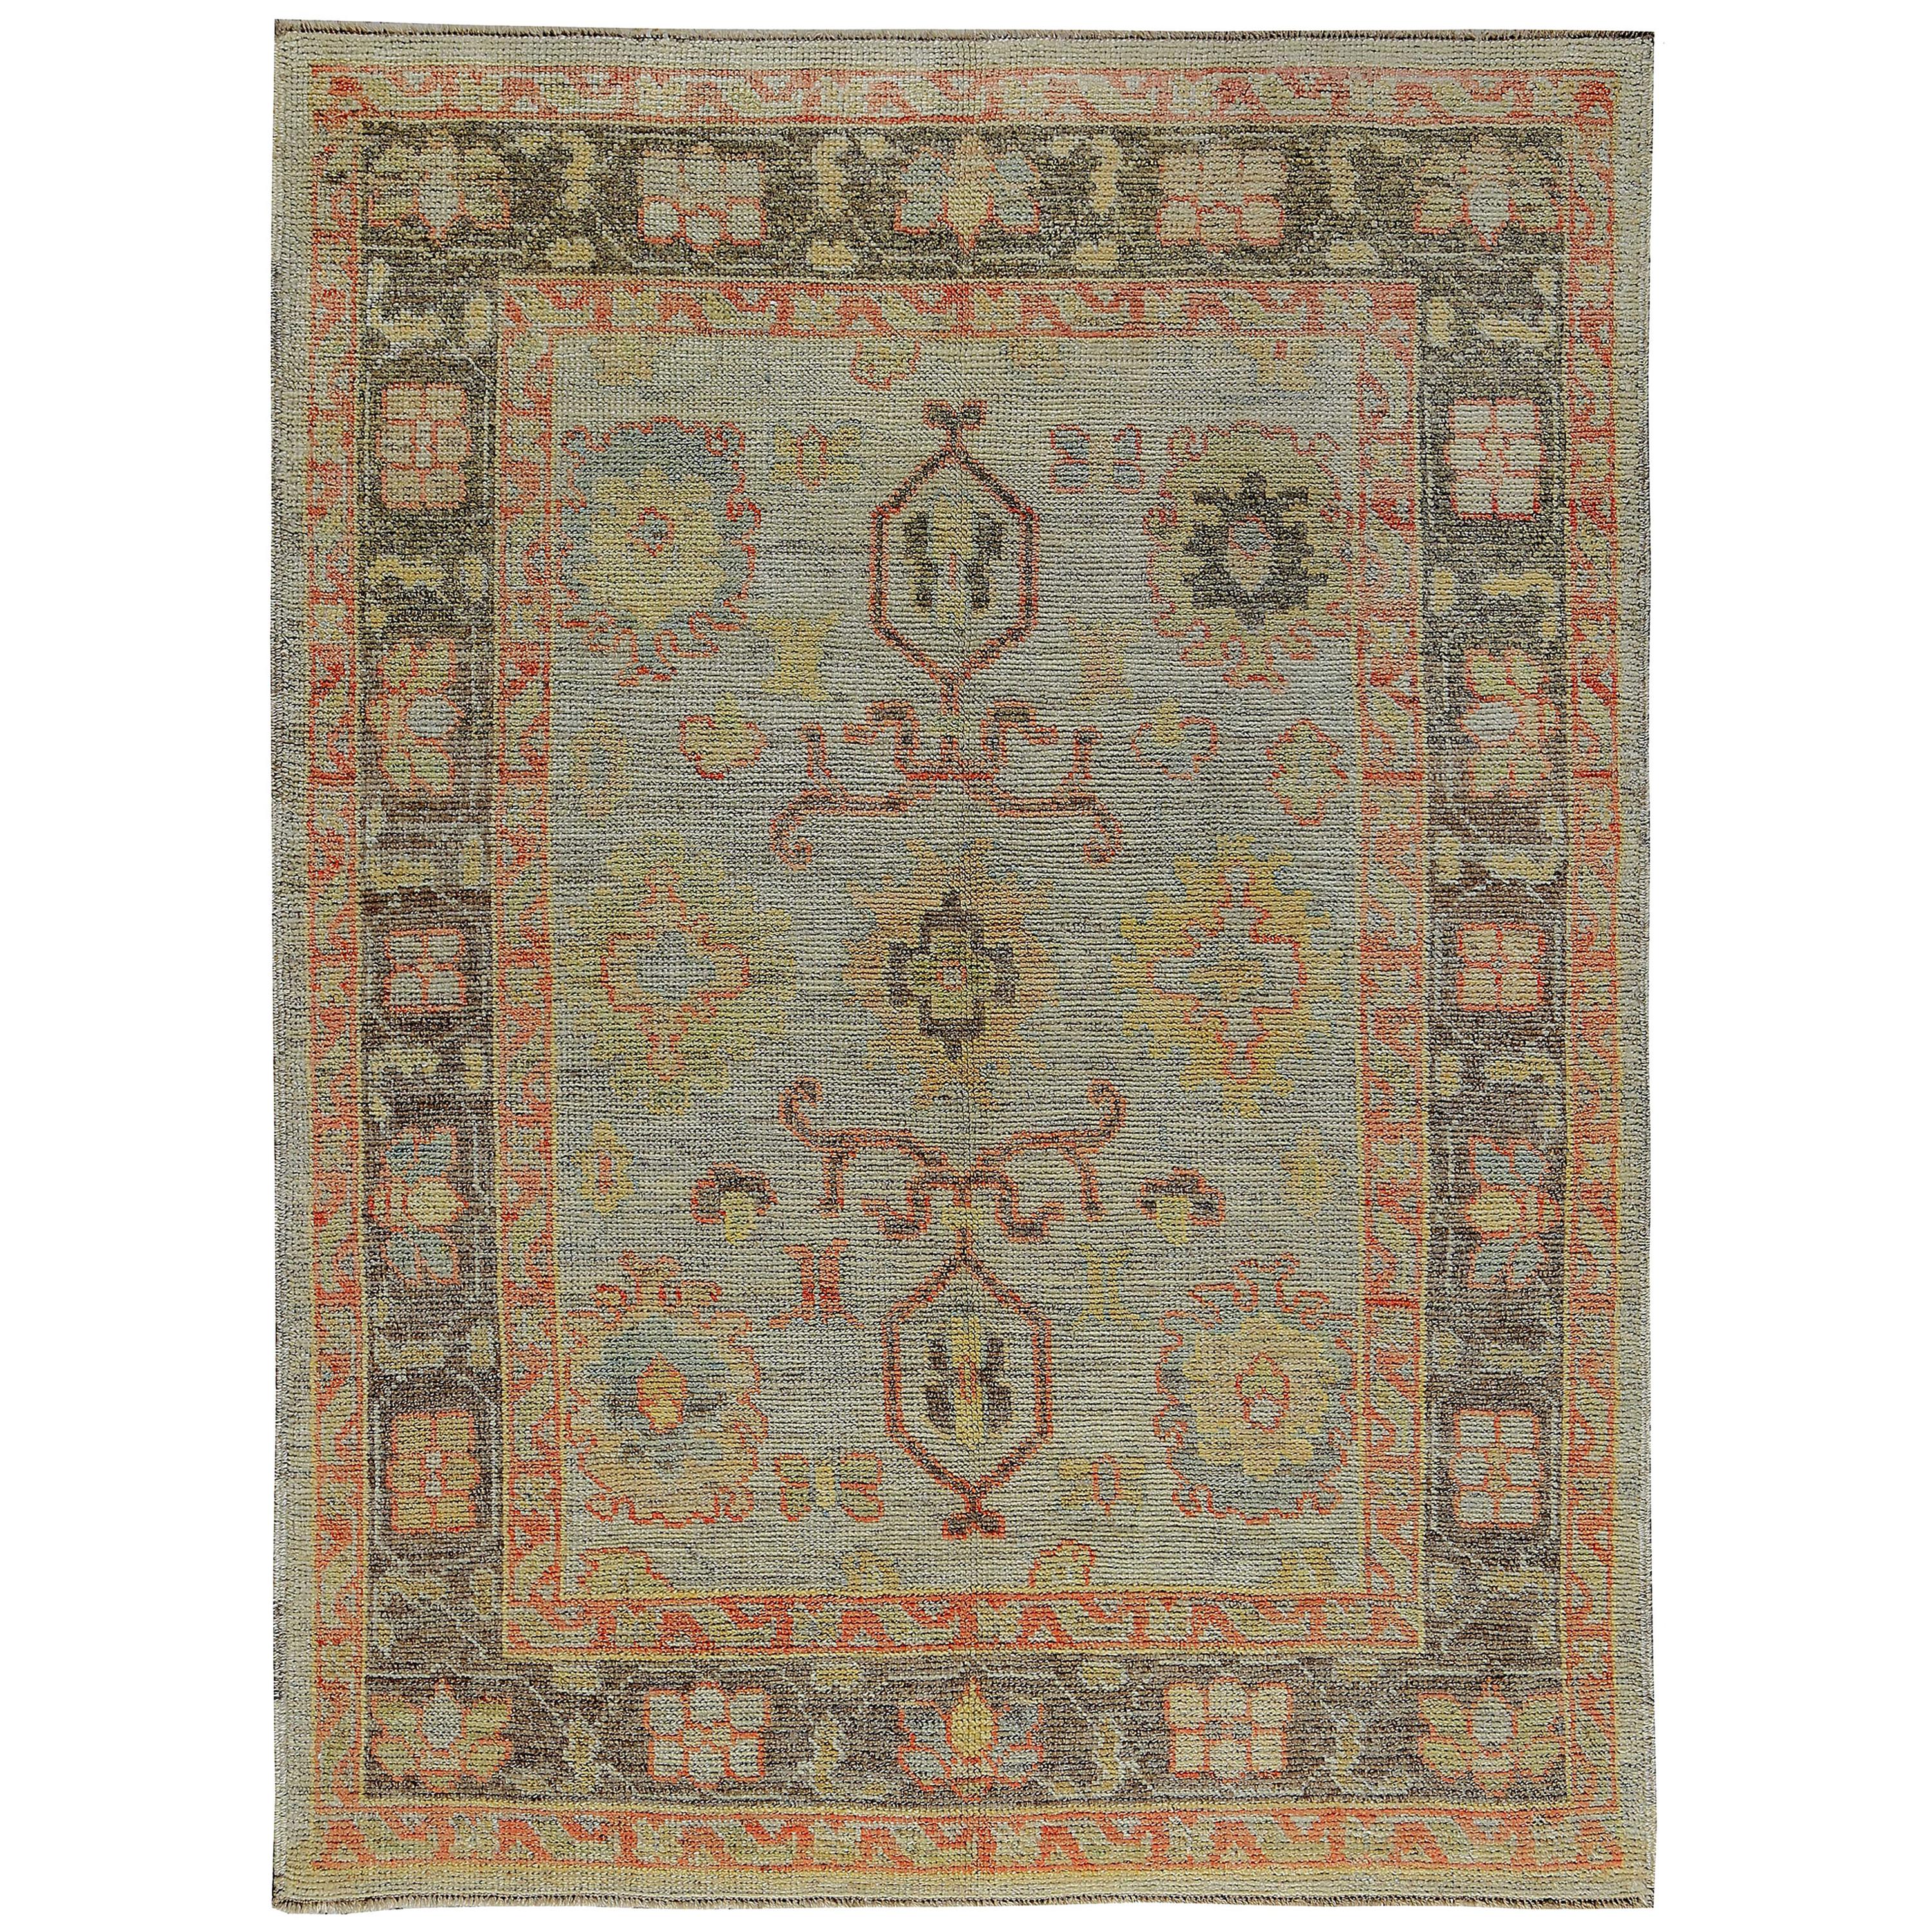 Turkish Oushak Rug with Orange and Yellow Floral Patterns on Ivory & Brown Field